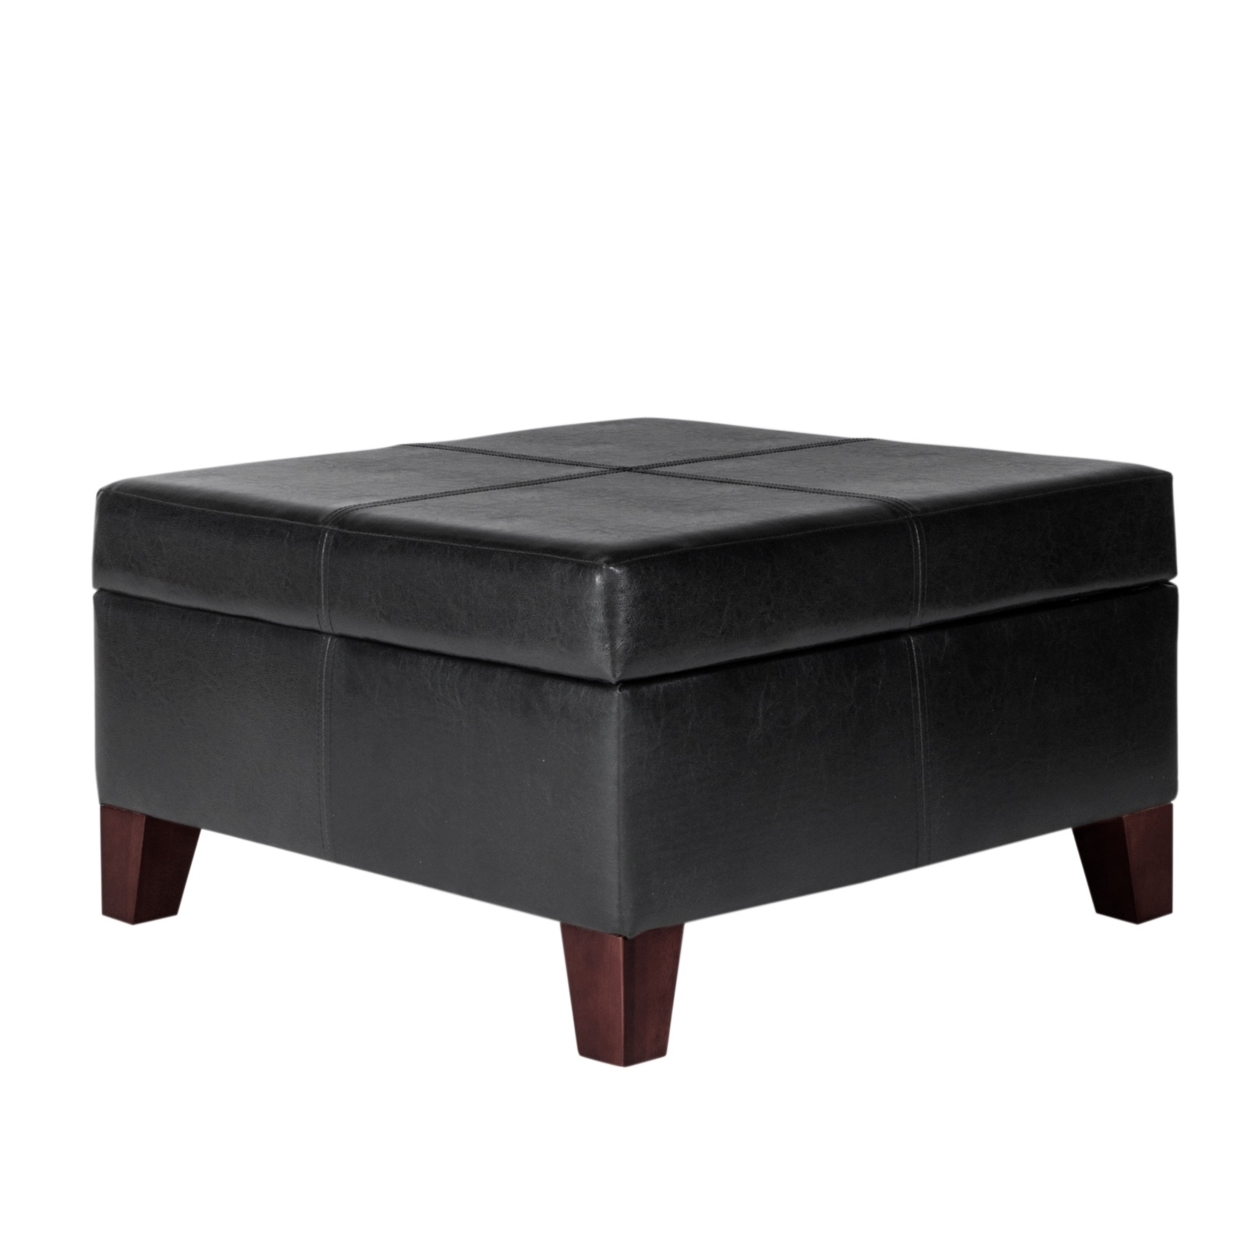 Leatherette Upholstered Wooden Ottoman With Hinged Storage, Black And Brown, Large- Saltoro Sherpi